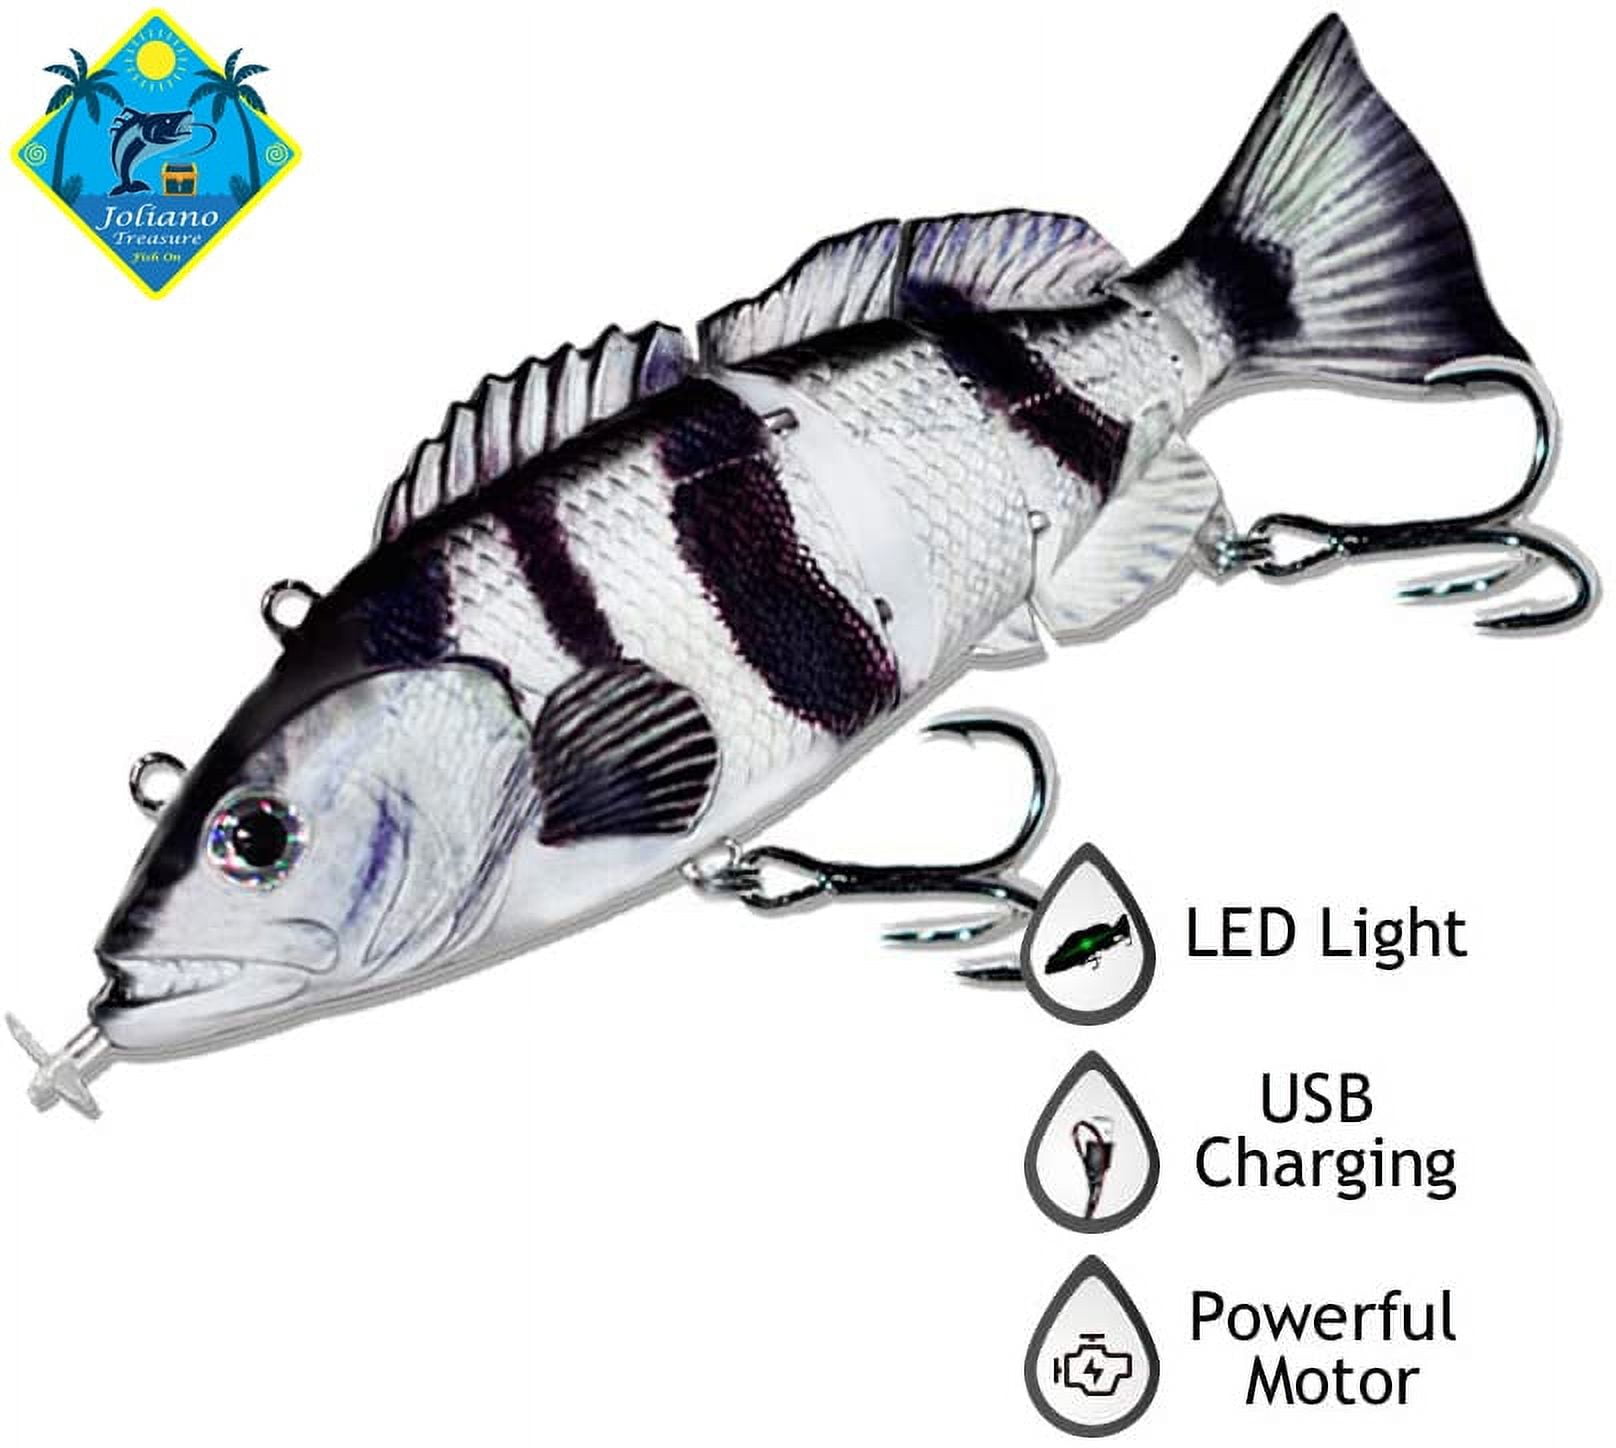 Joliano Robotic Swimming Lure Auto Electric Lure USB Rechargeable